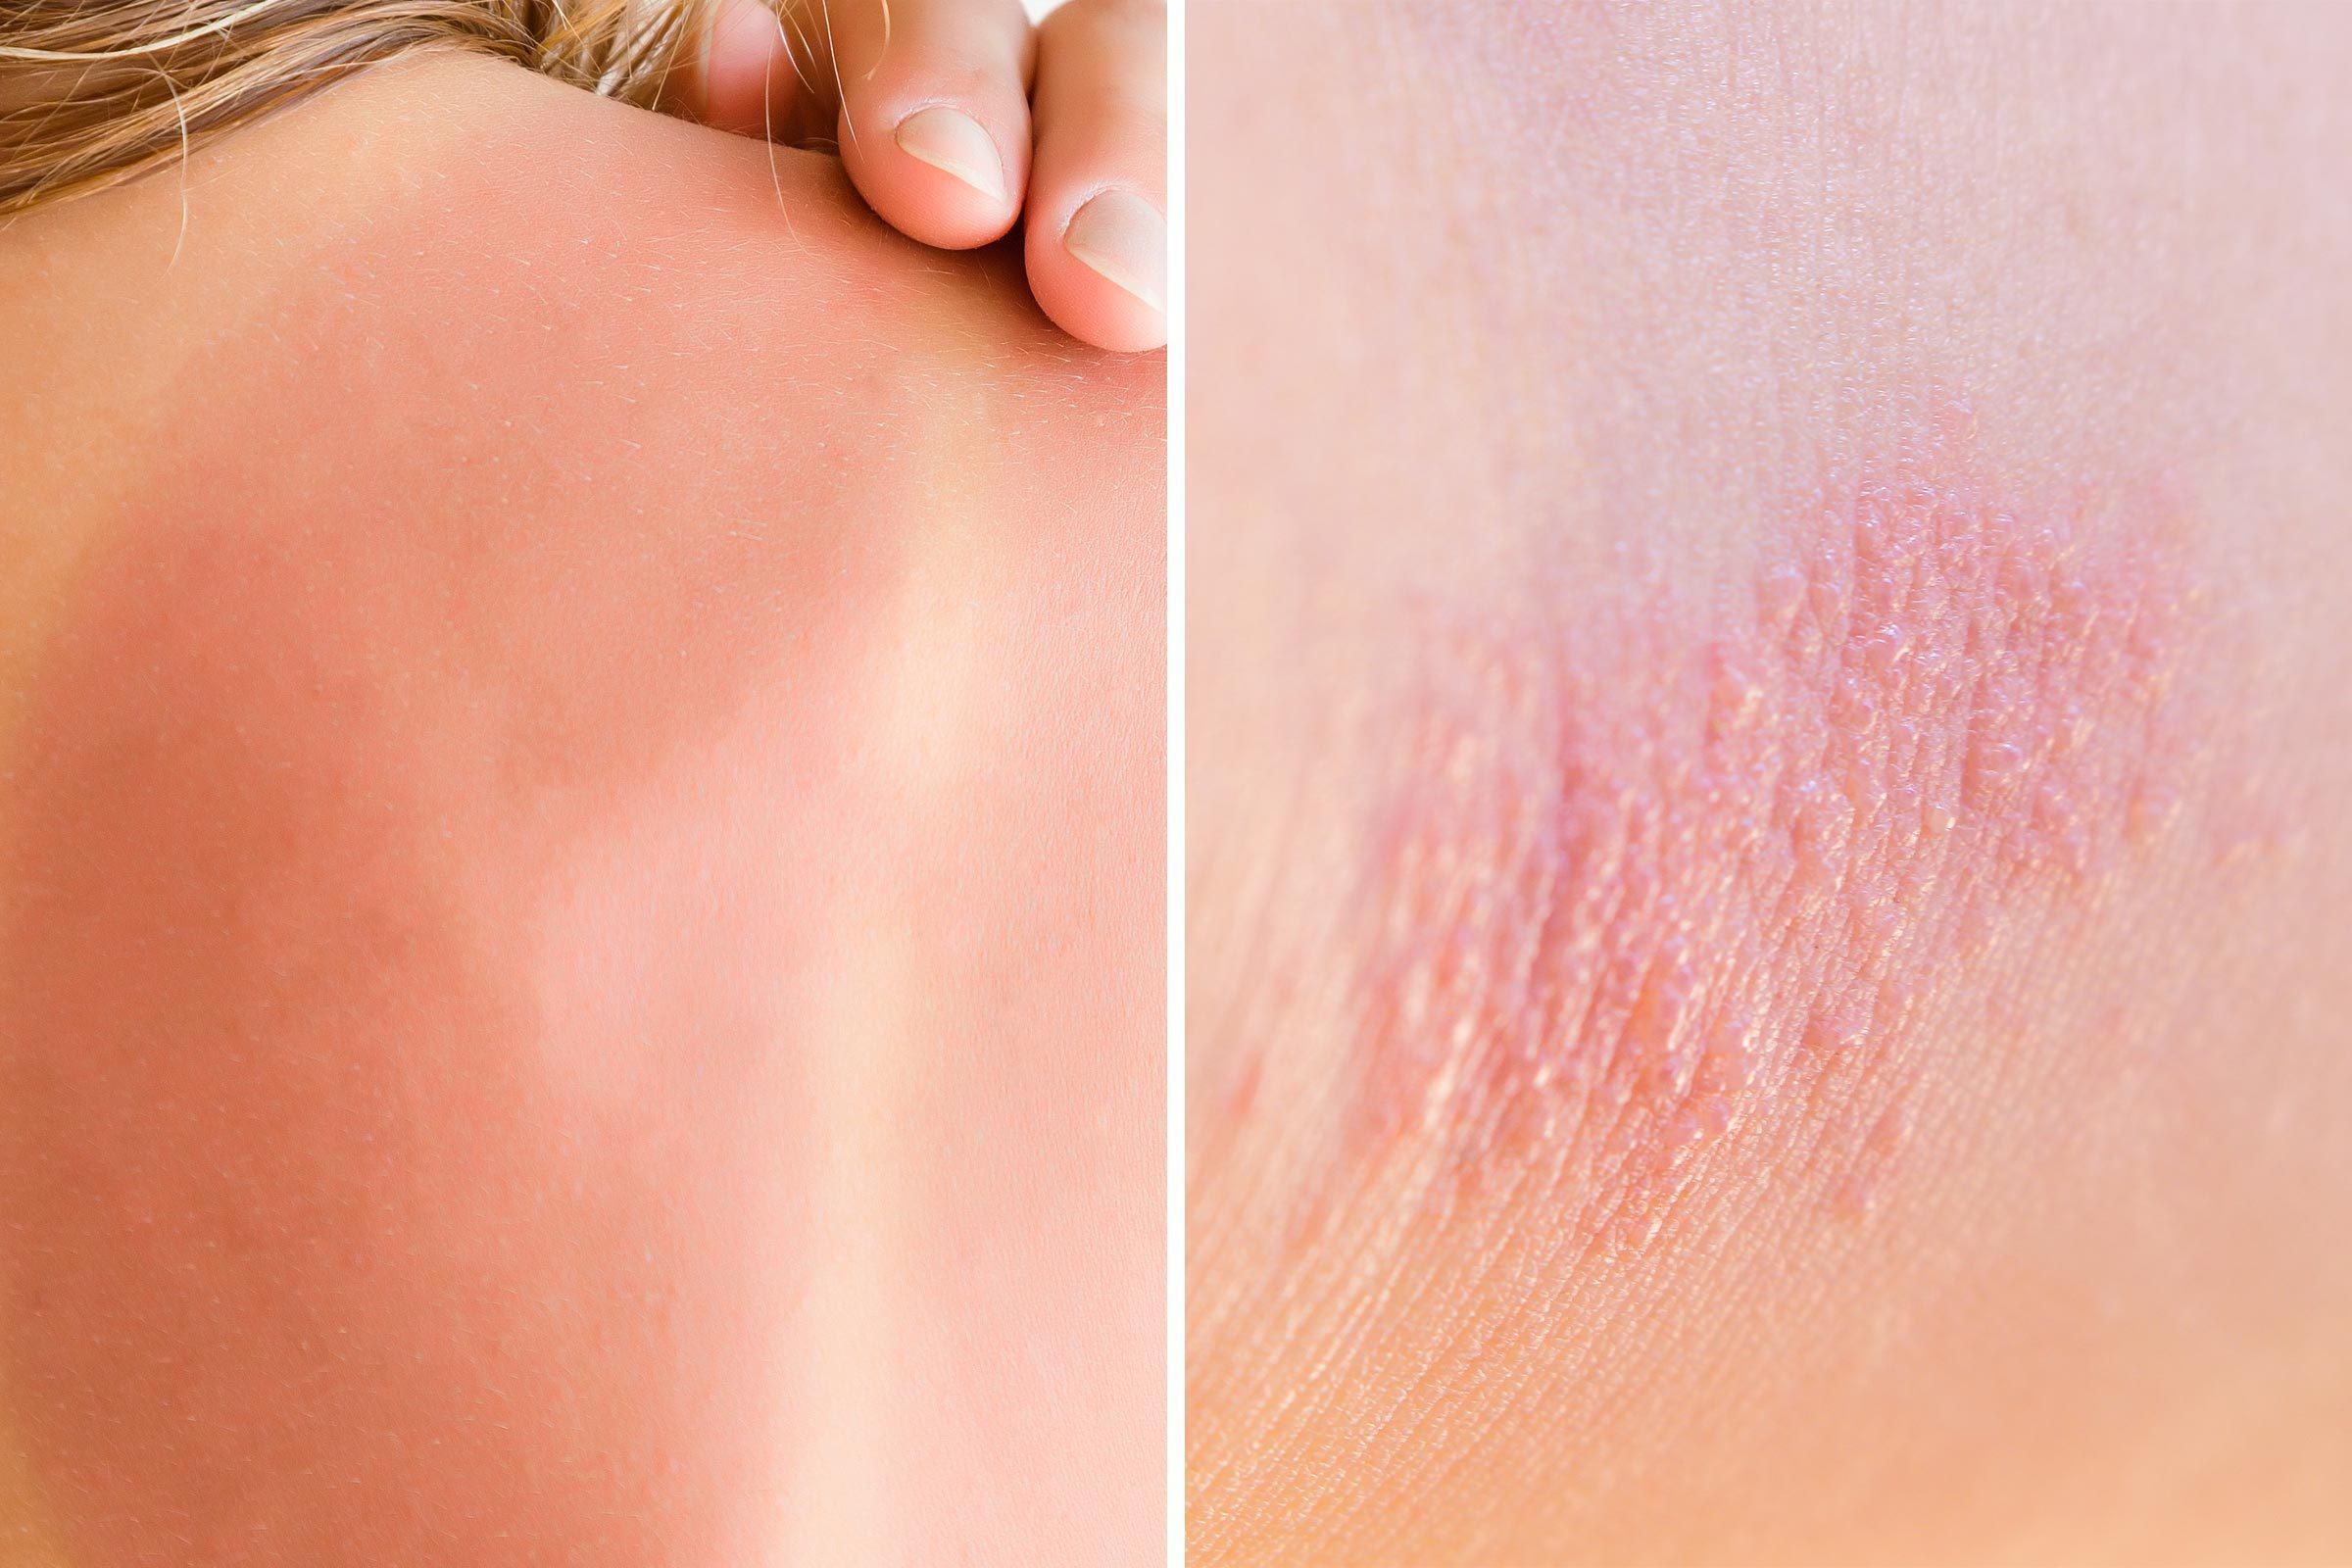 Heat Rash or Sunburn: Here’s How to Tell the Difference